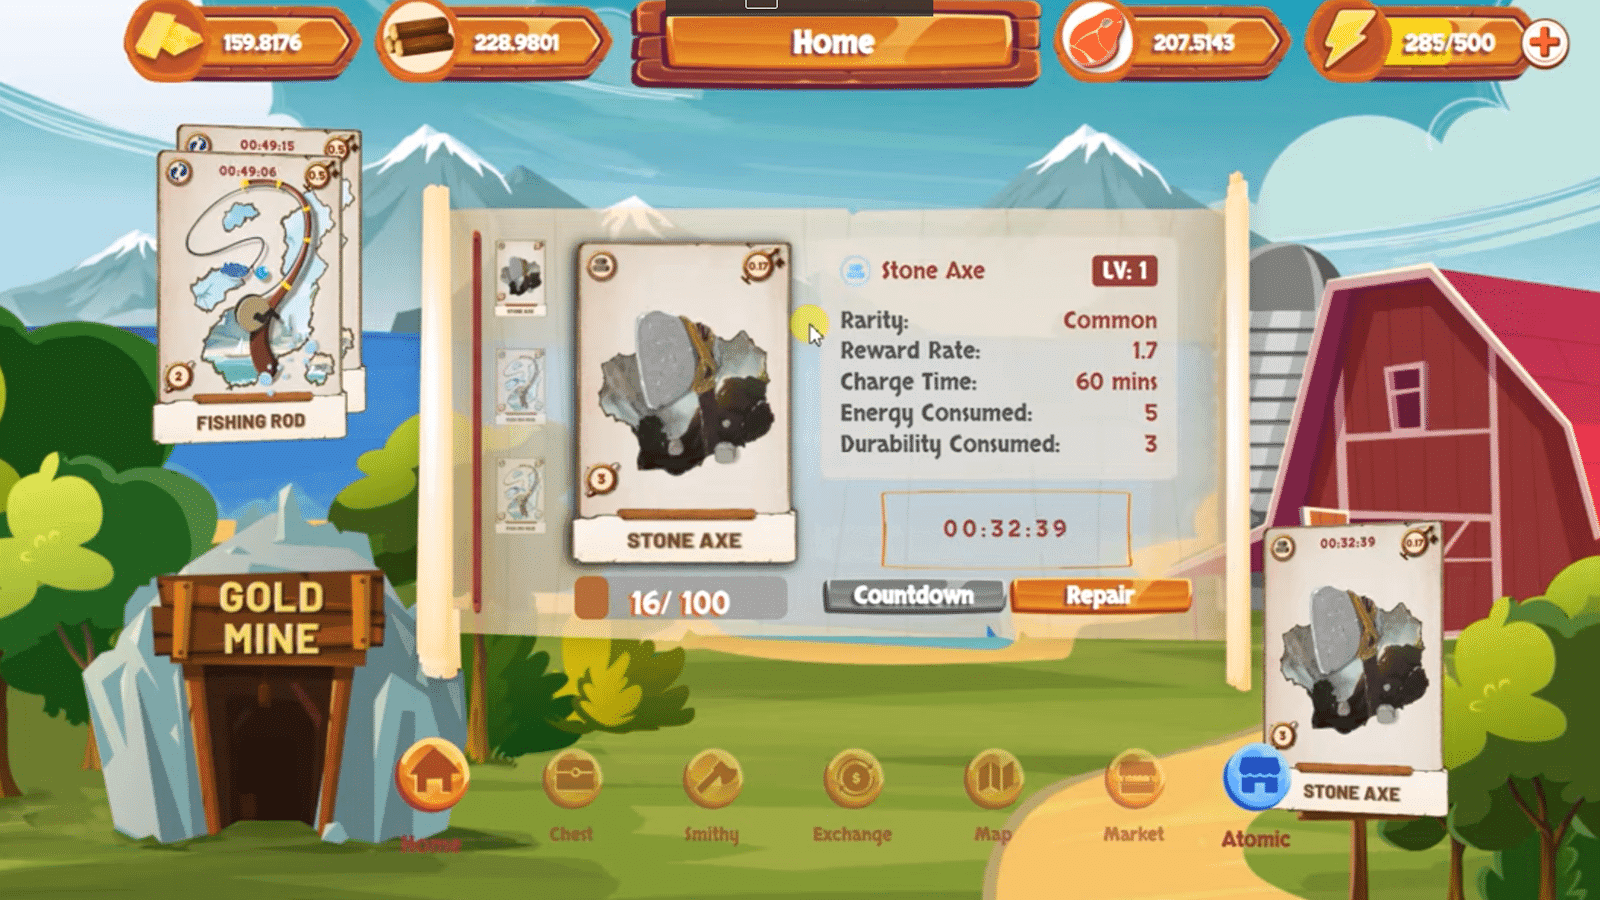 Farmers World Review - How to Play & Earn Money